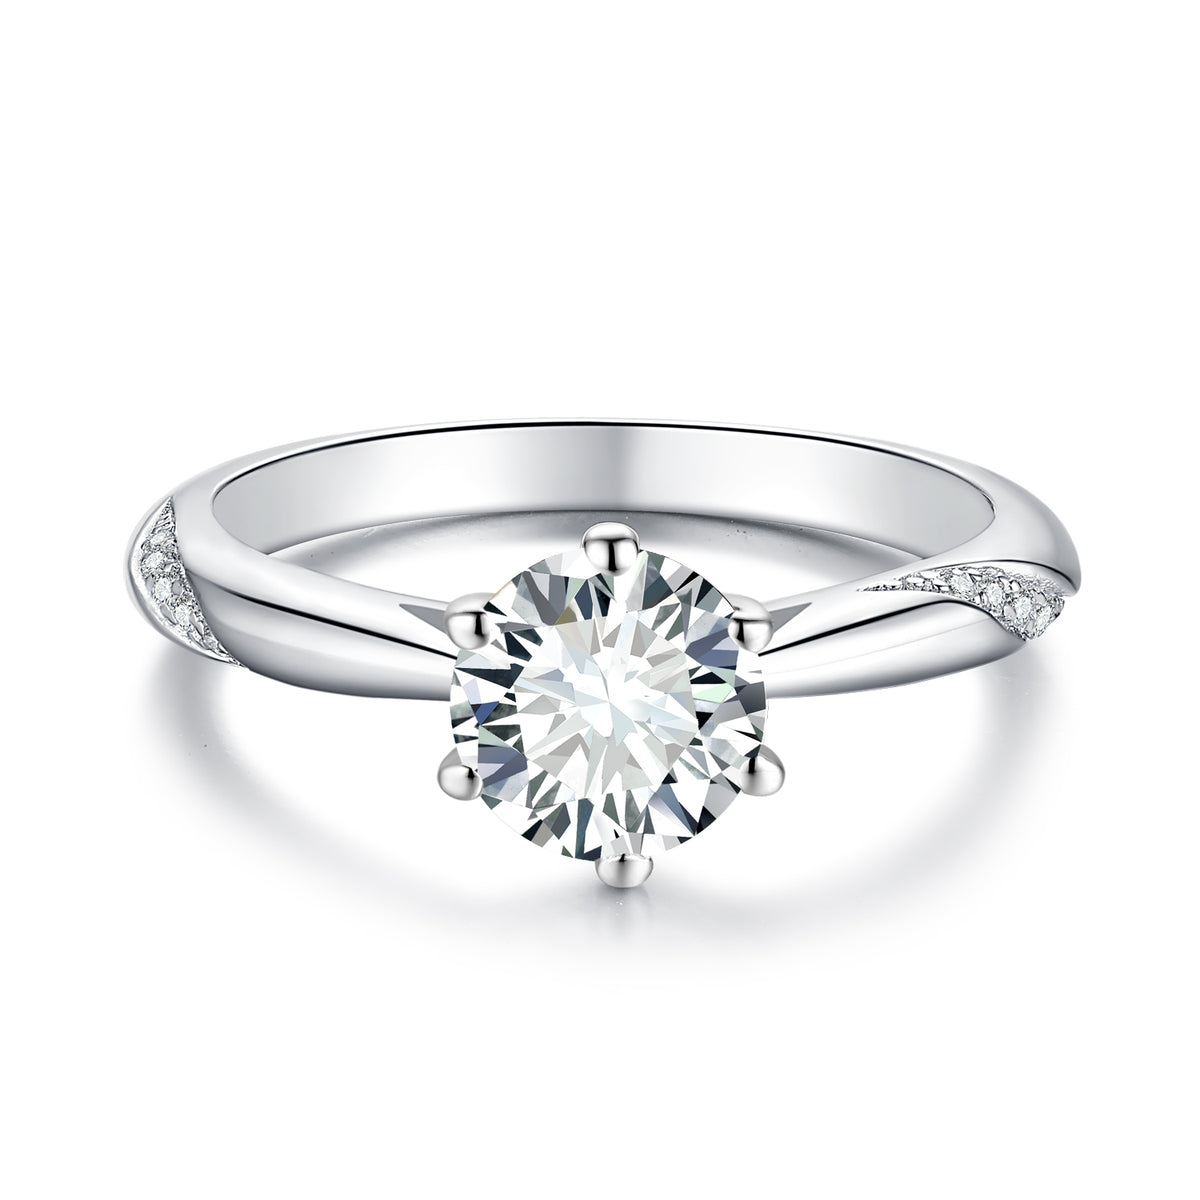 【02LIVE # link 39 - BUY 1 GET 1 free ring 】S925 Silver Moissanite Diamond Psychic Ring 1/2/5Carat RM1019